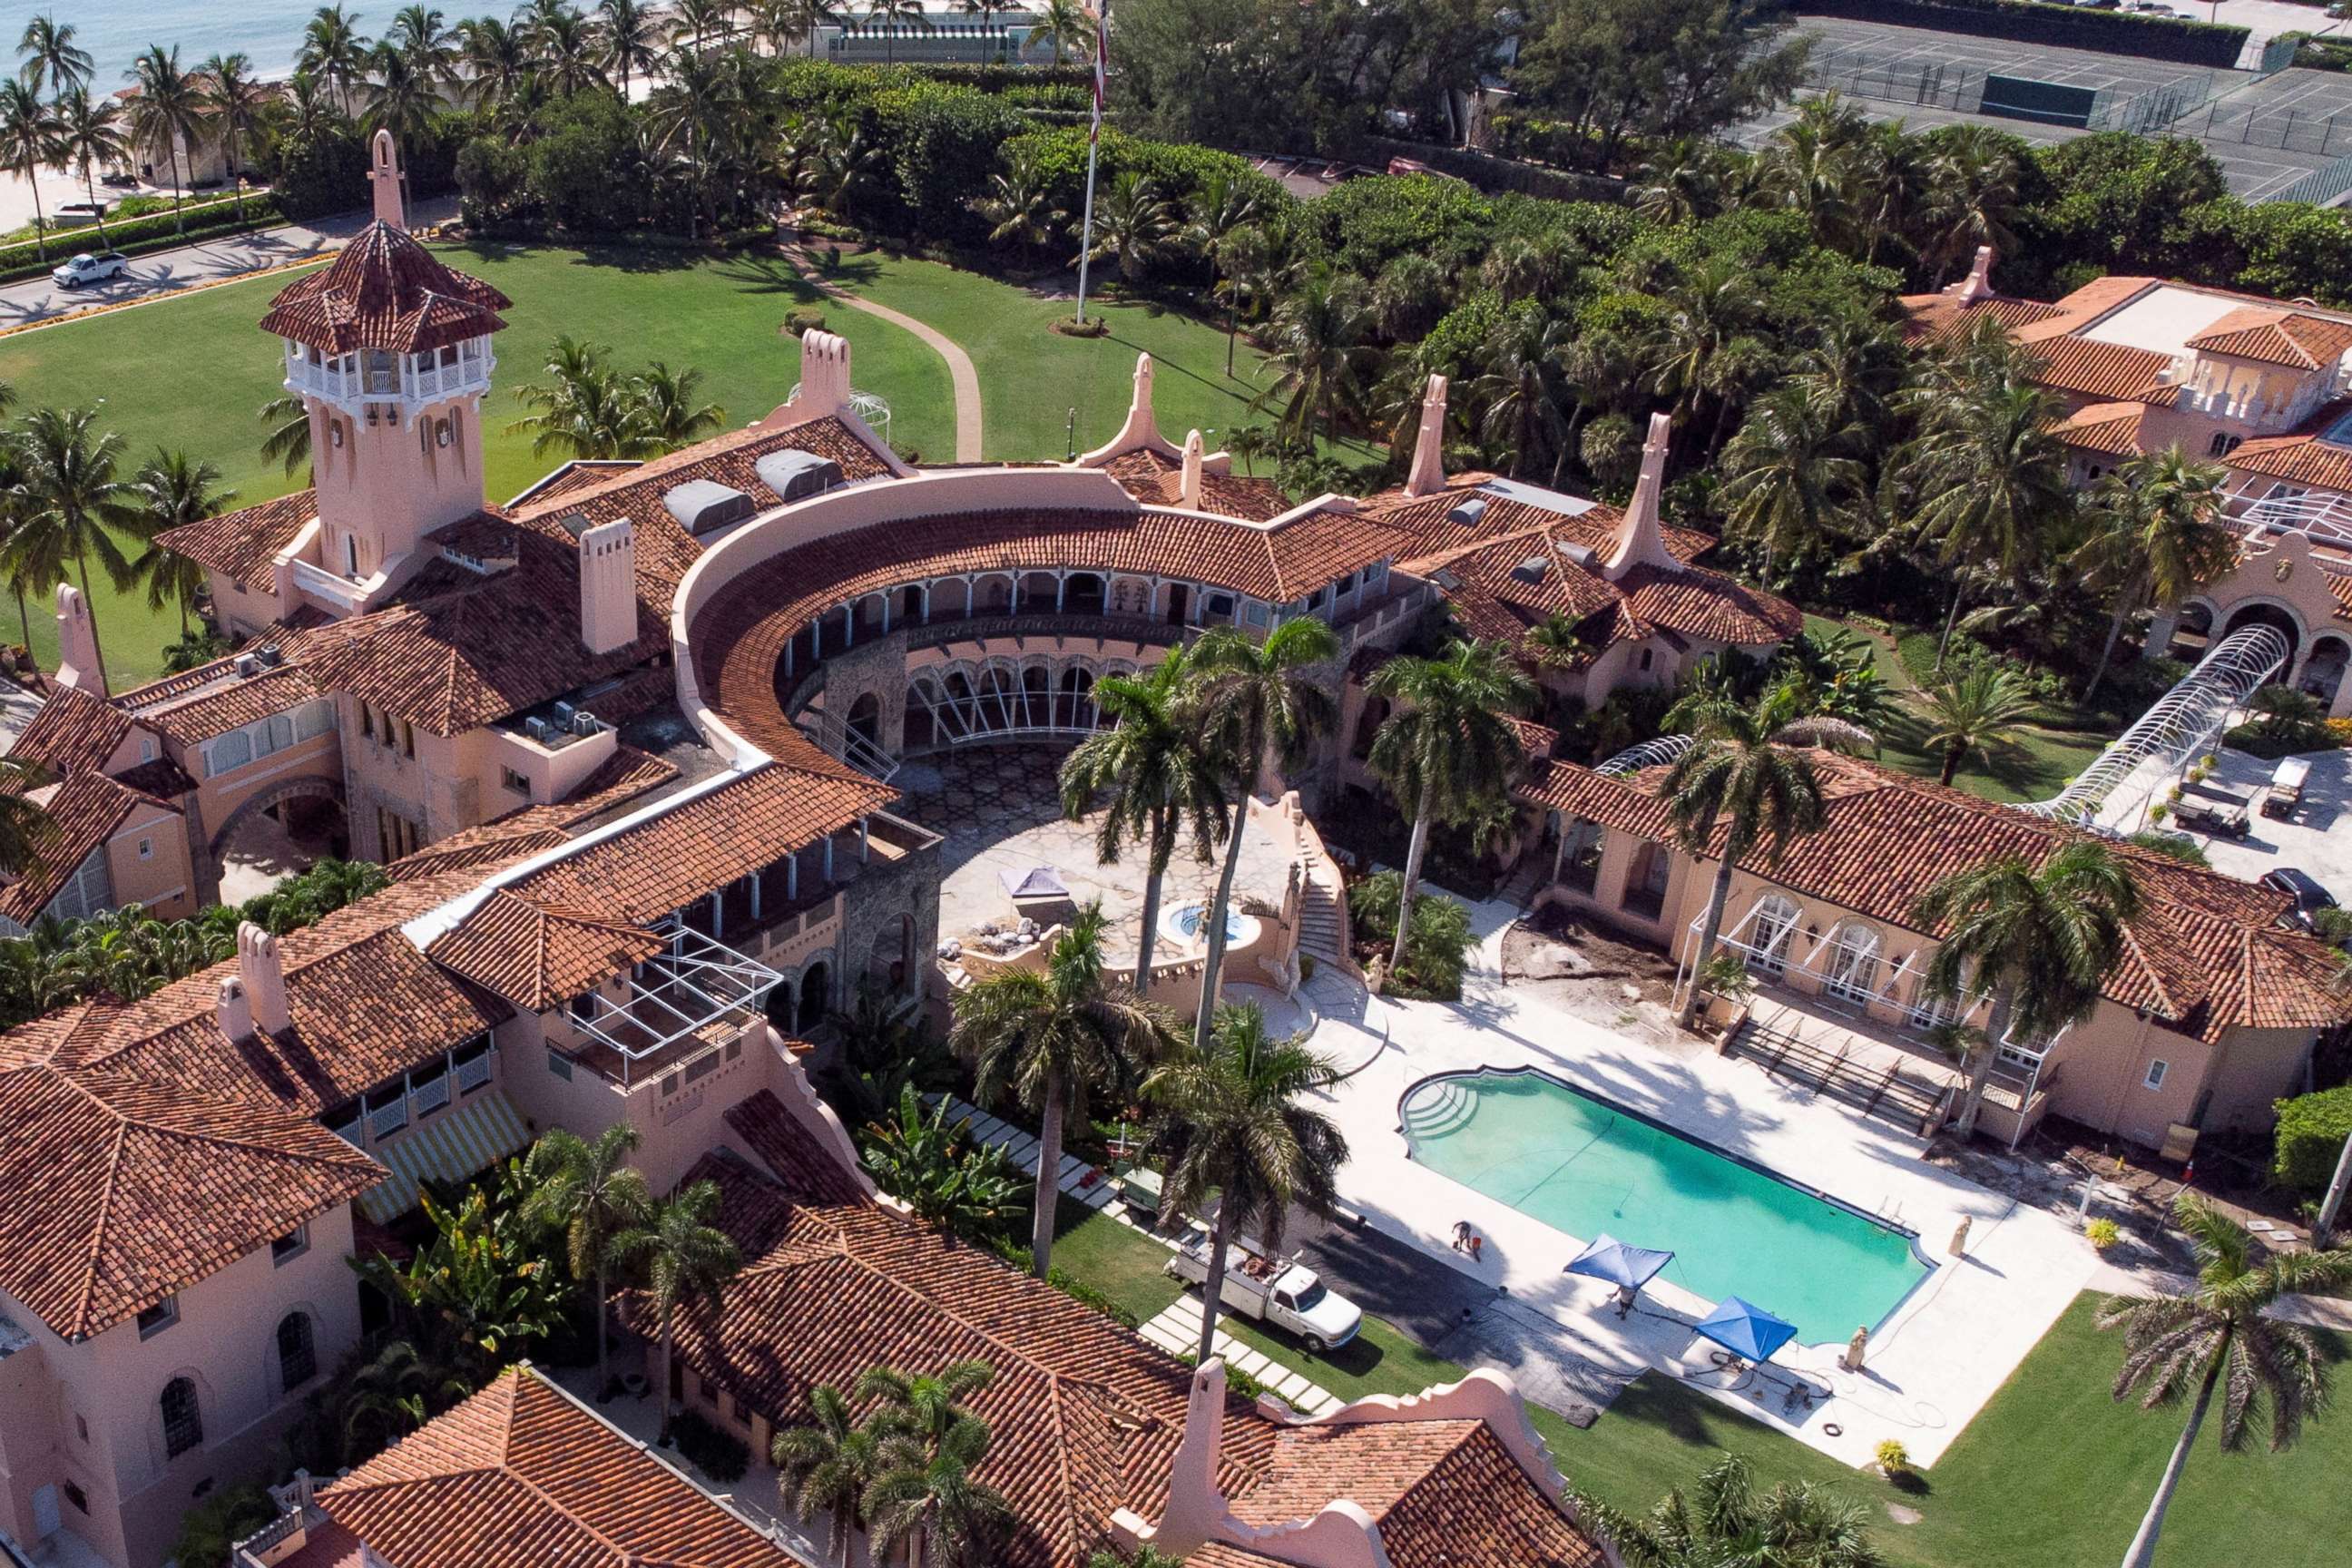 PHOTO: An aerial view shows former U.S. President Donald Trump's Mar-a-Lago home after Trump said that FBI agents searched it, in Palm Beach, Fla. Aug. 15, 2022.